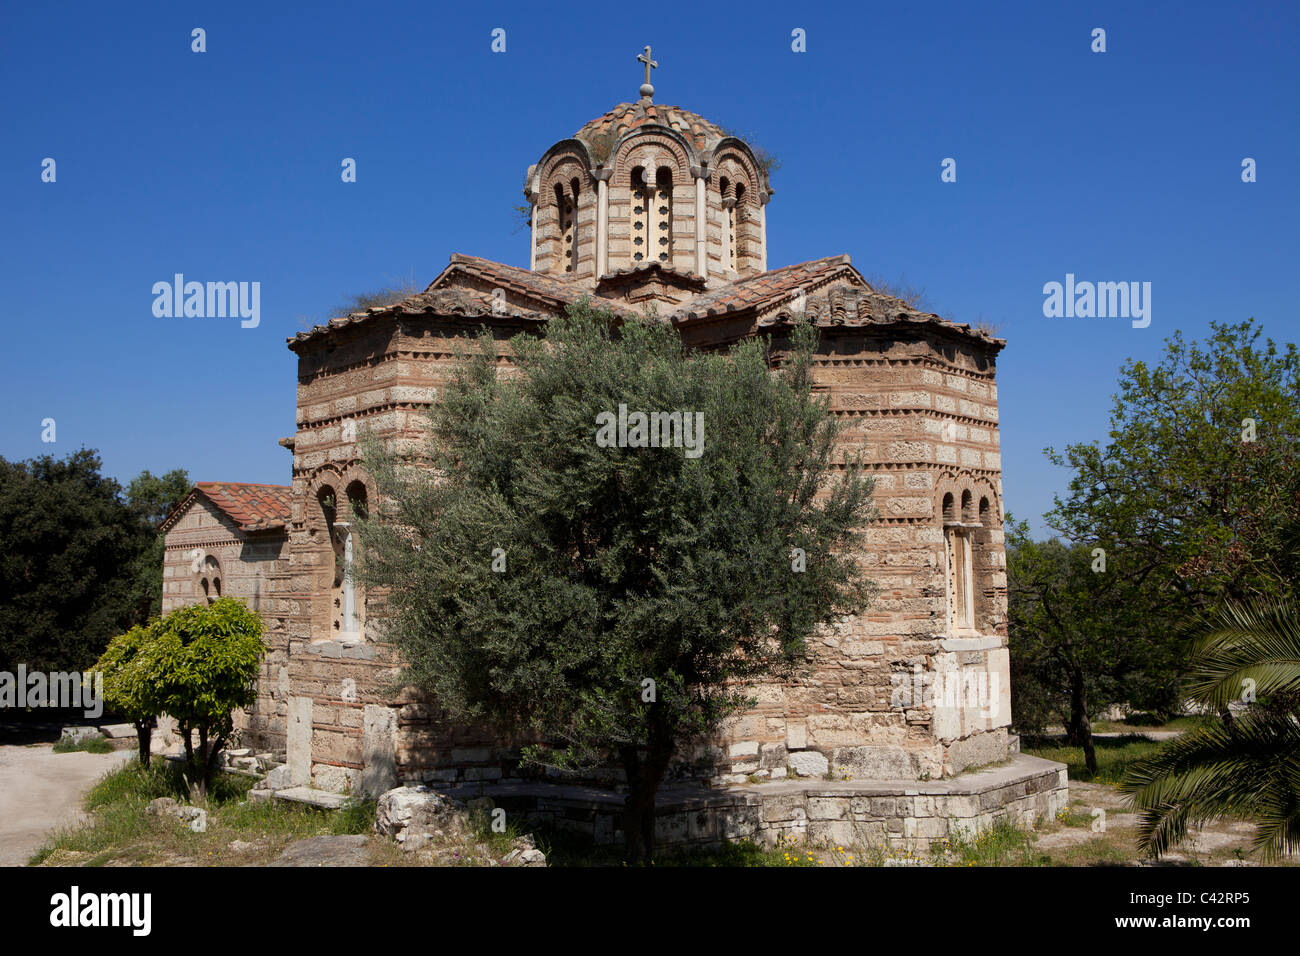 The medieval Church of the Holy Apostles of Solakis at the Agora in Athens, Greece Stock Photo